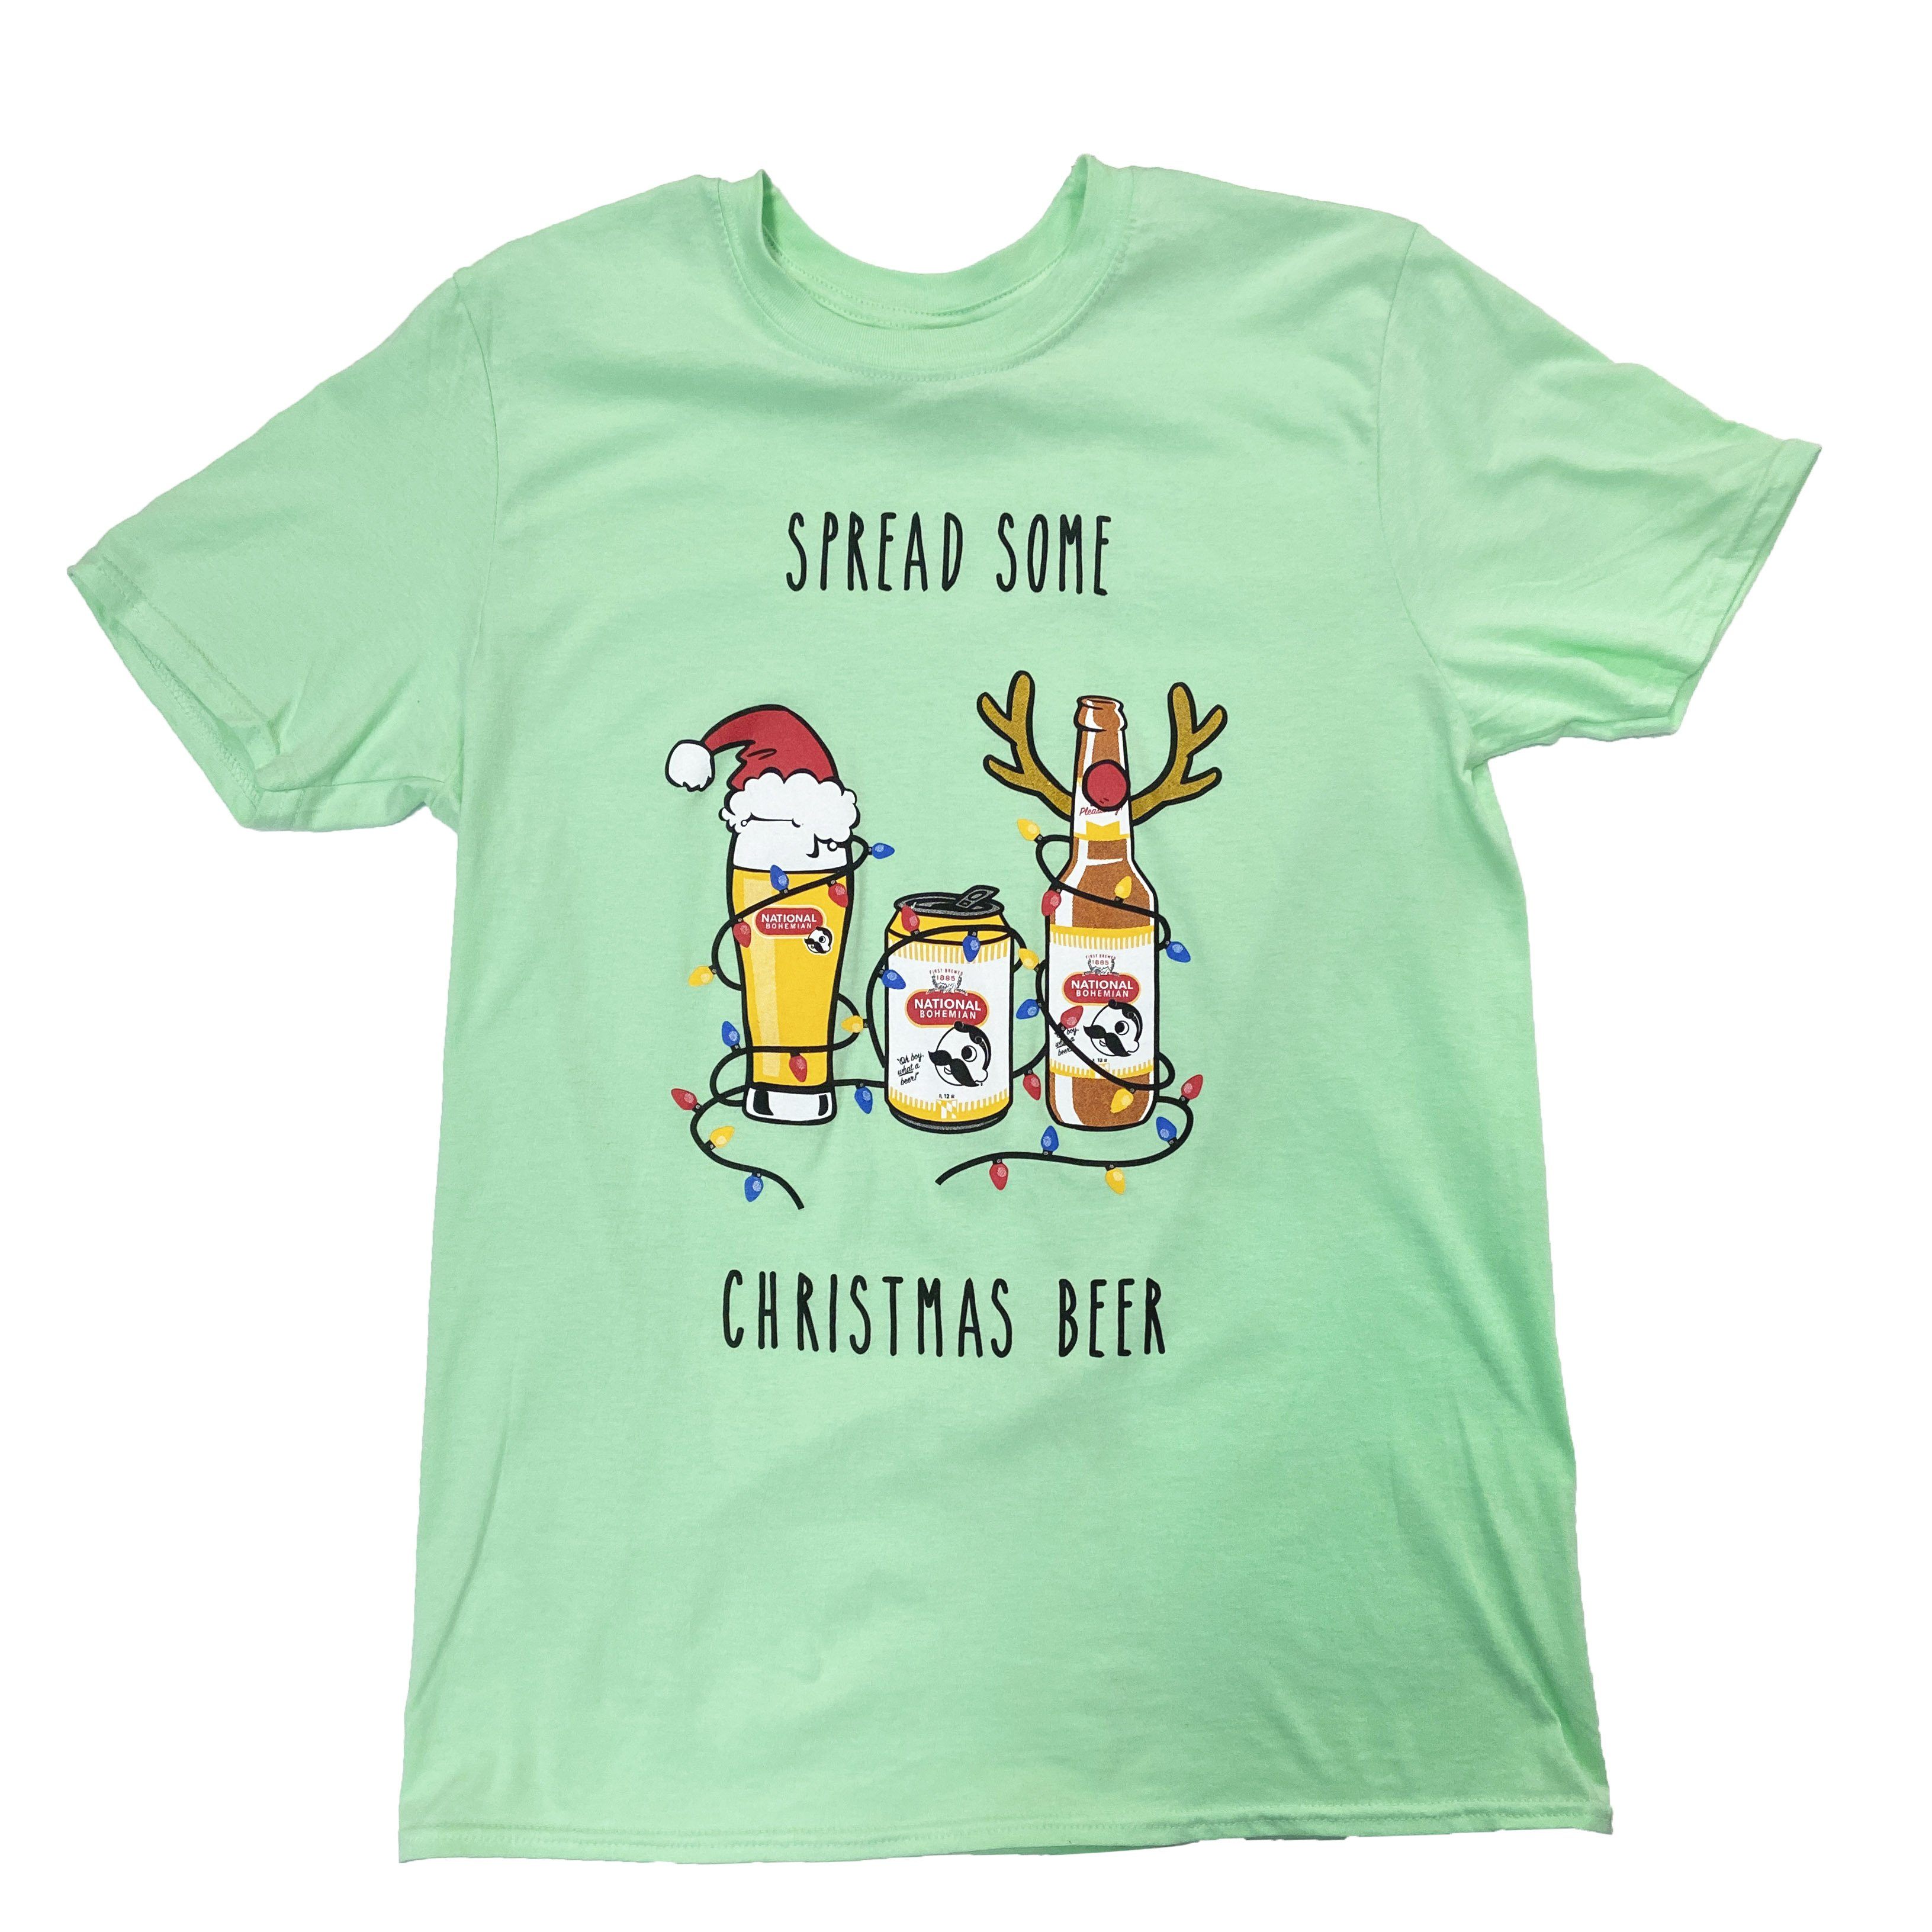 Spread Some Christmas Beer (Mint Green) / Shirt - Route One Apparel